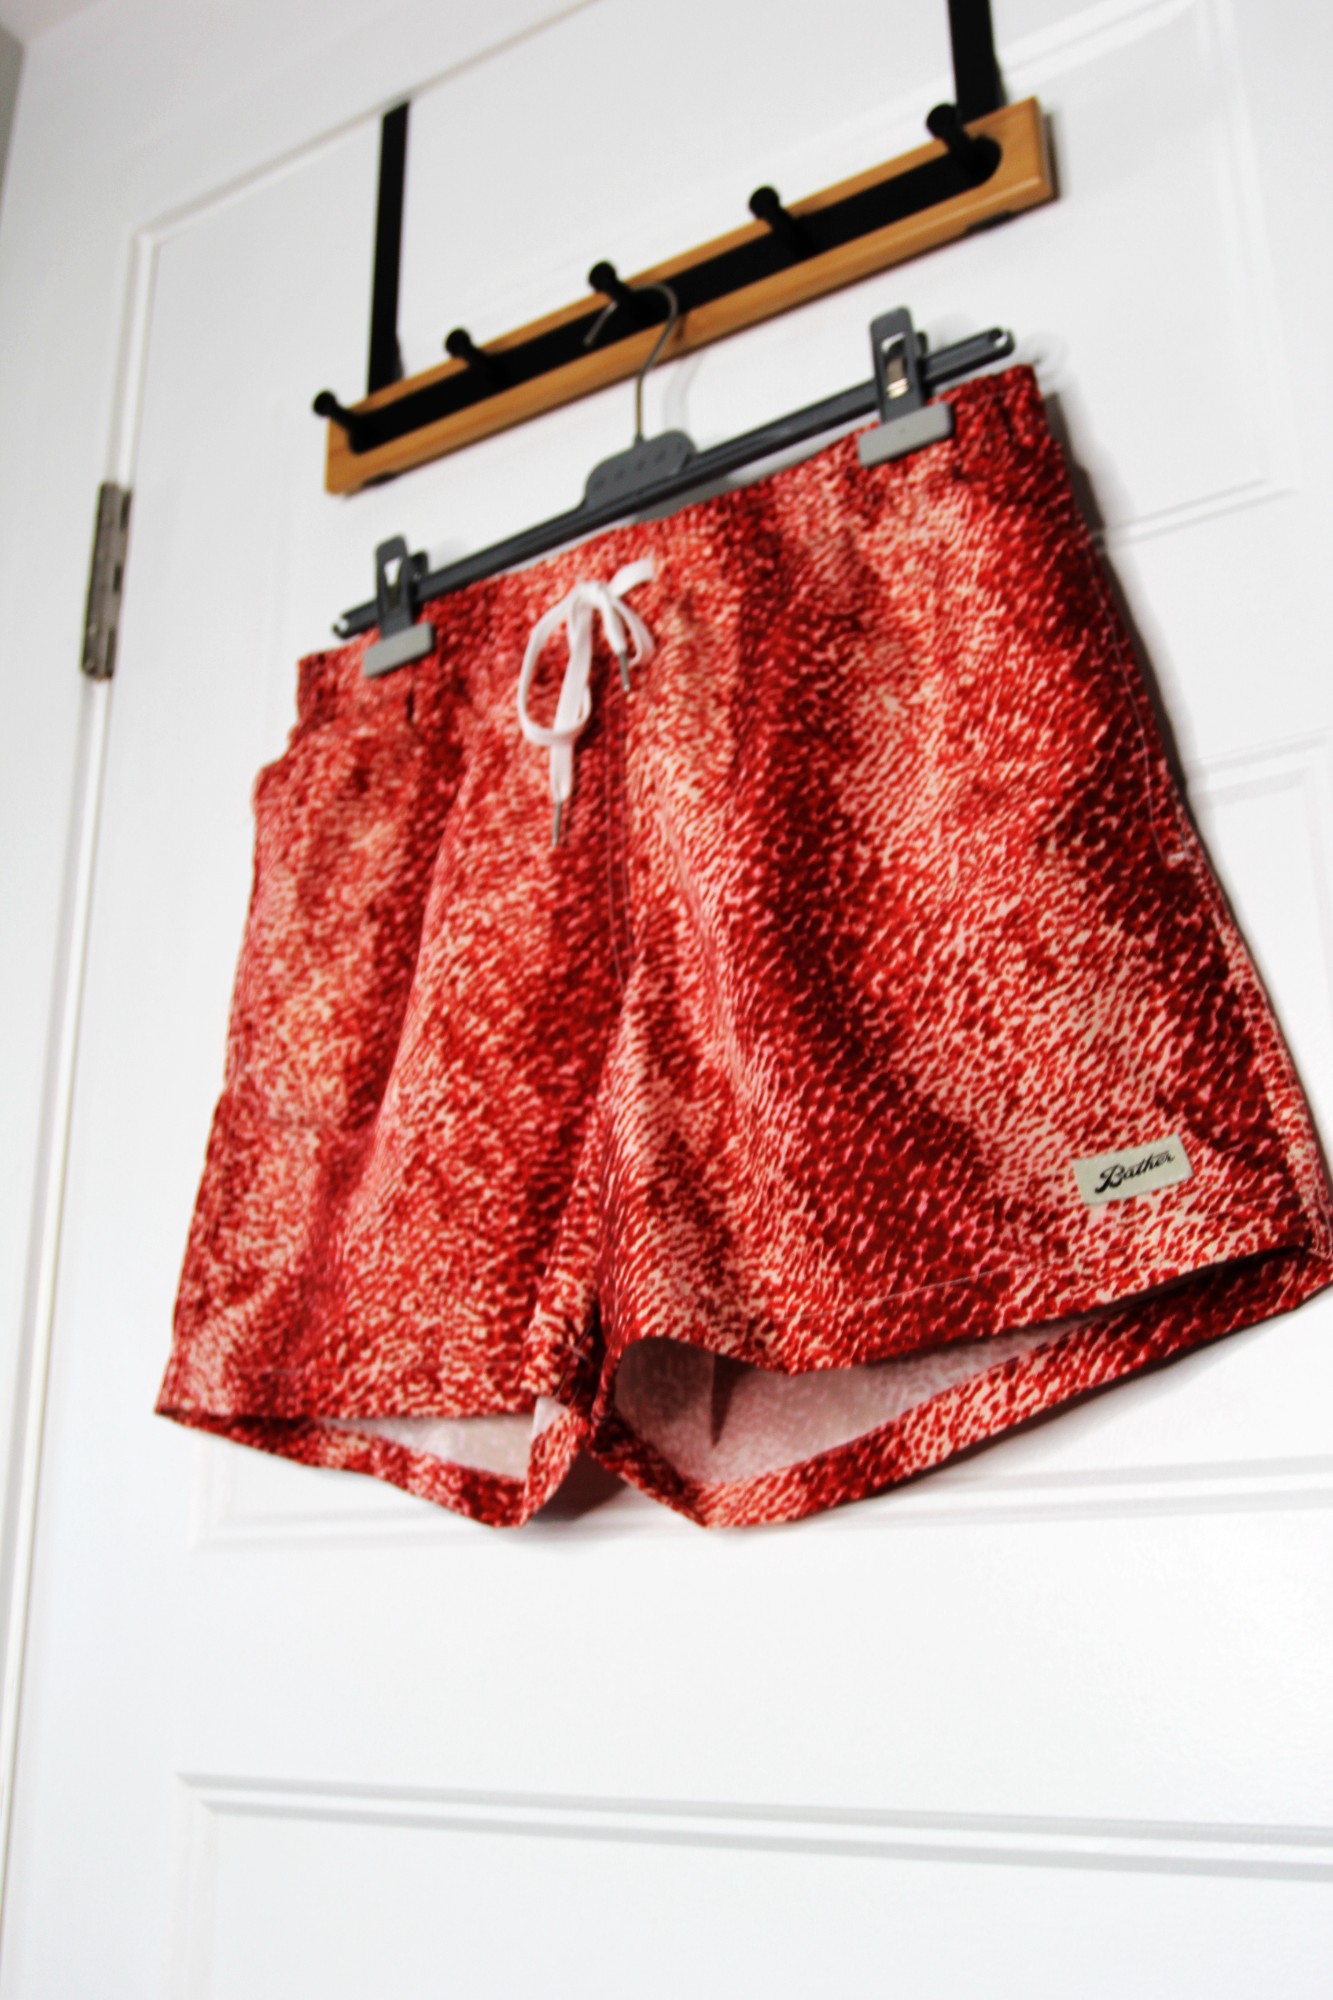 BNWT SS23 BATHER RED PAINTED MOSS SWIM SHORTS M - 6